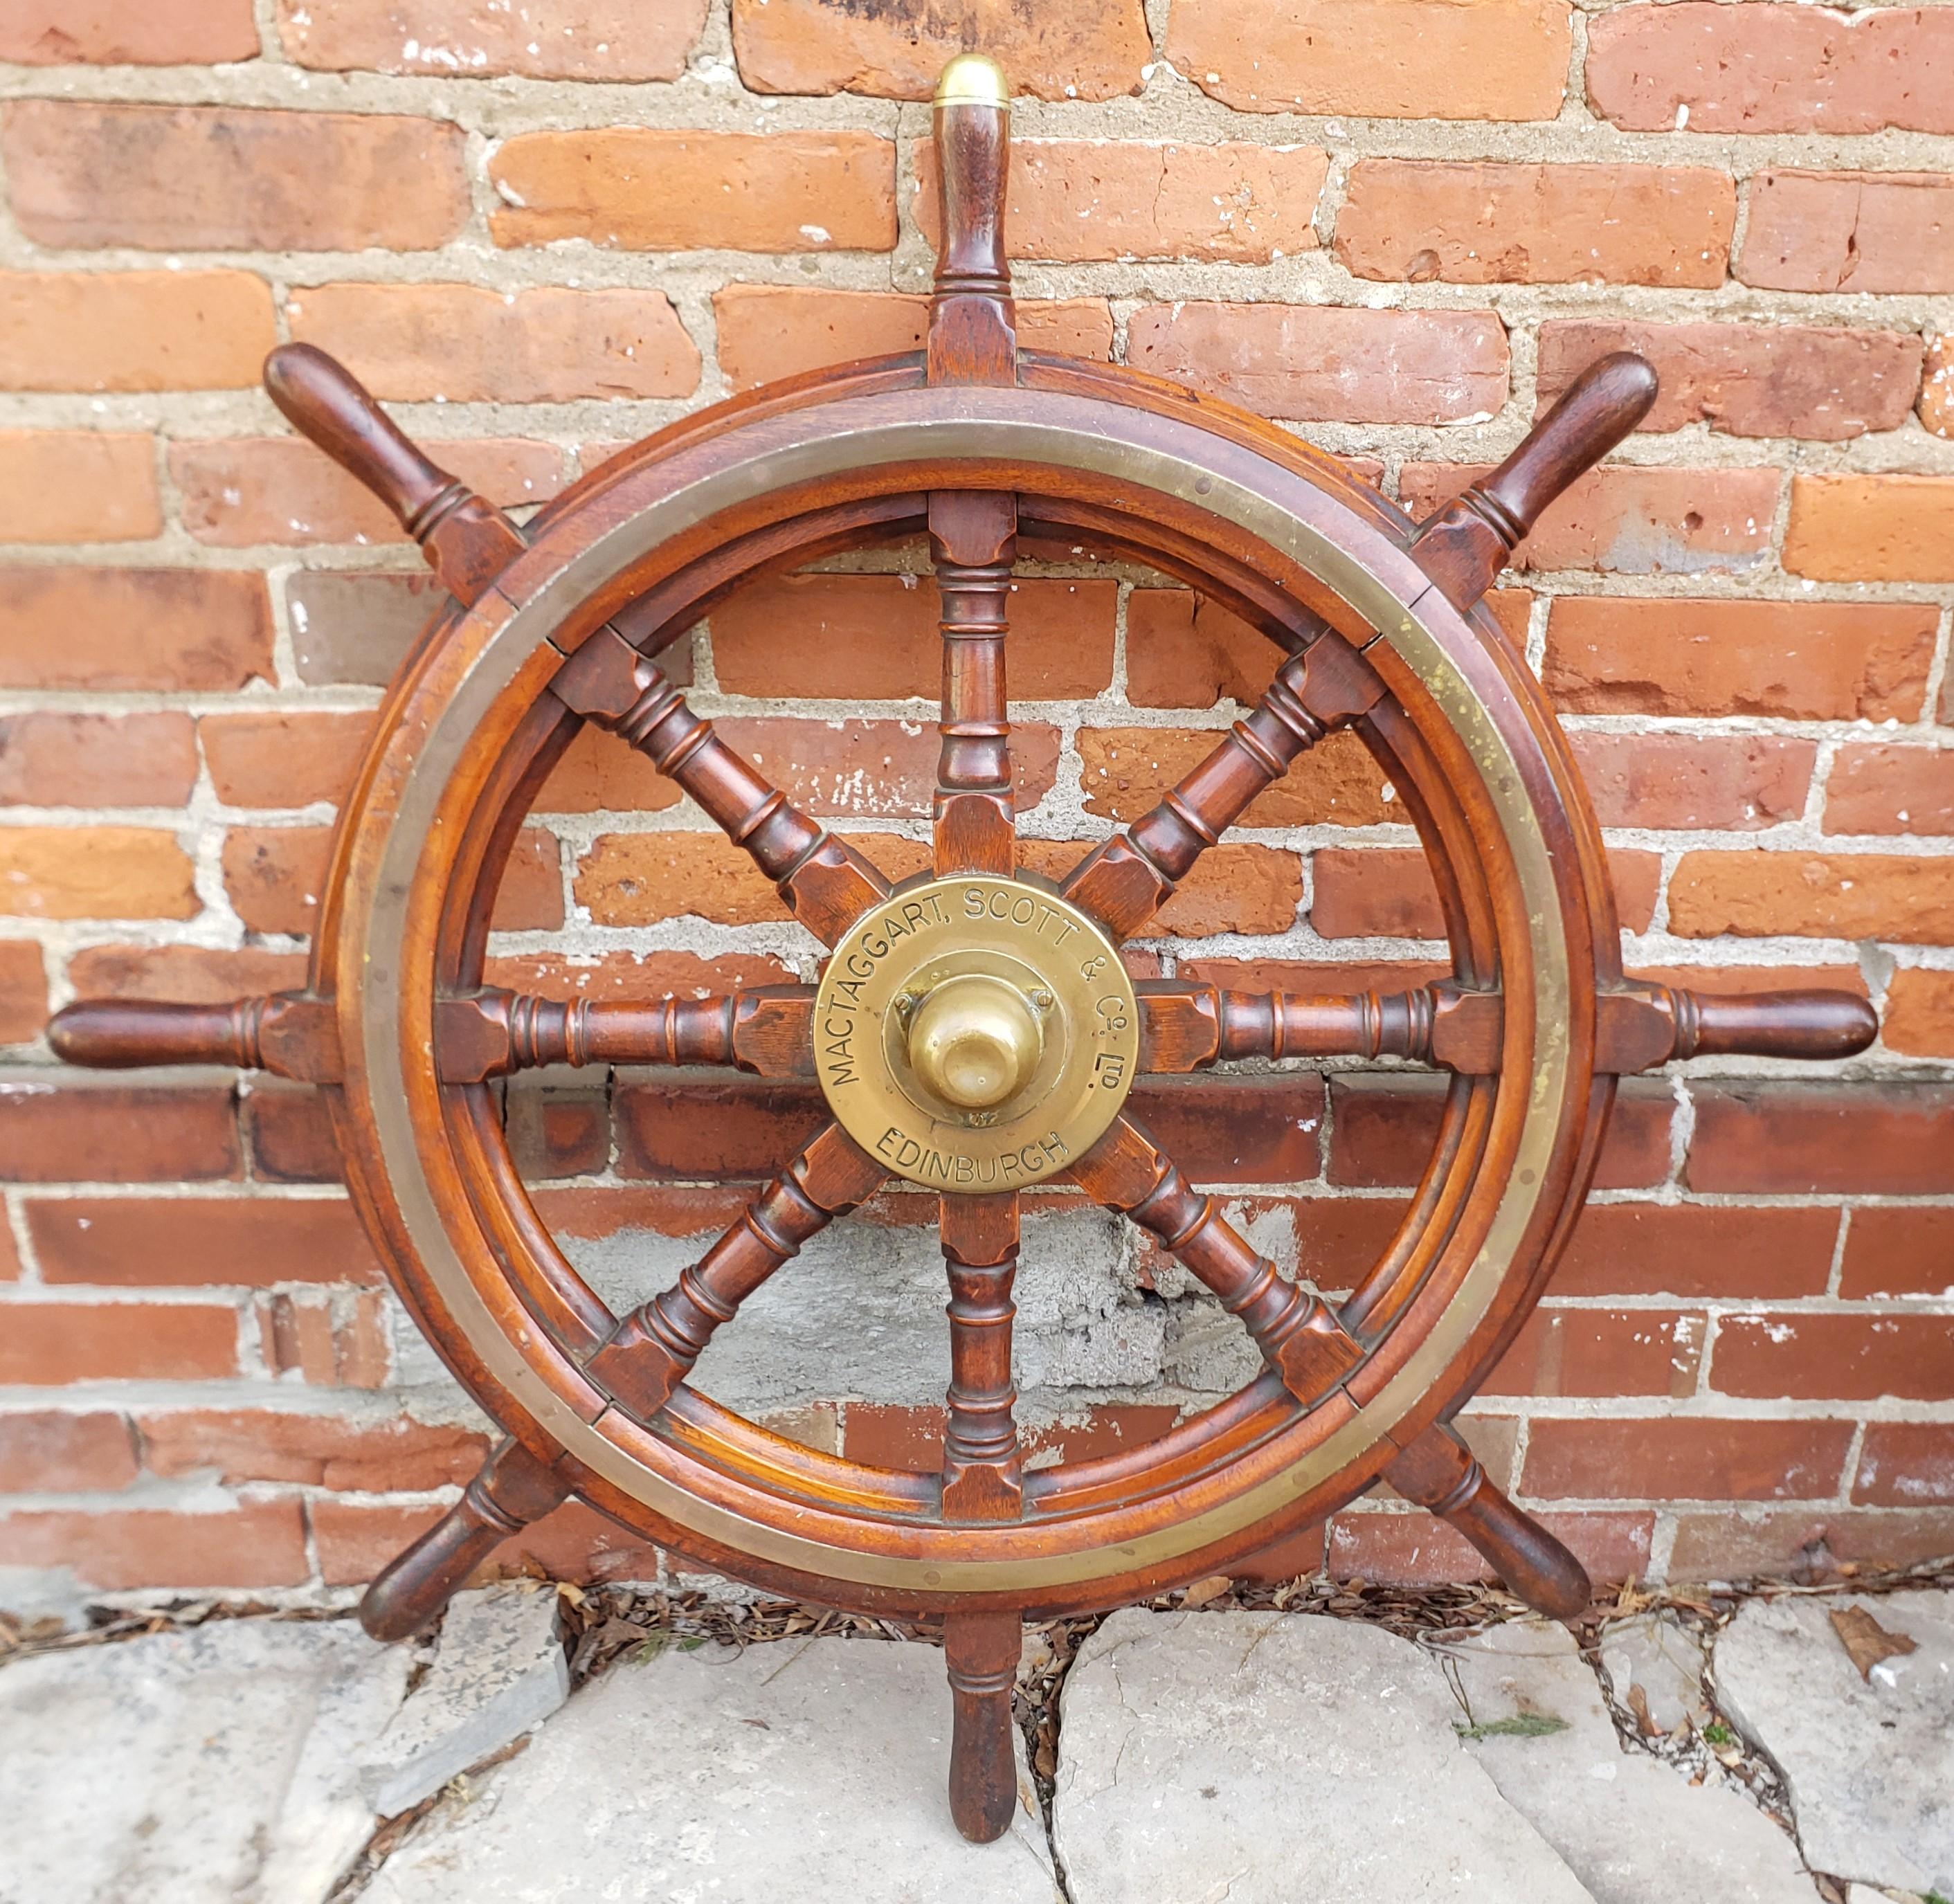 This antique ship's wheel was made by the MacTaggart, Scott & Co. of Edenborough, Scotland and dates to approximately 1900 and done in the period style. This ship's wheel is composed of solid oak with a brass hub fitting with the maker's mark on the